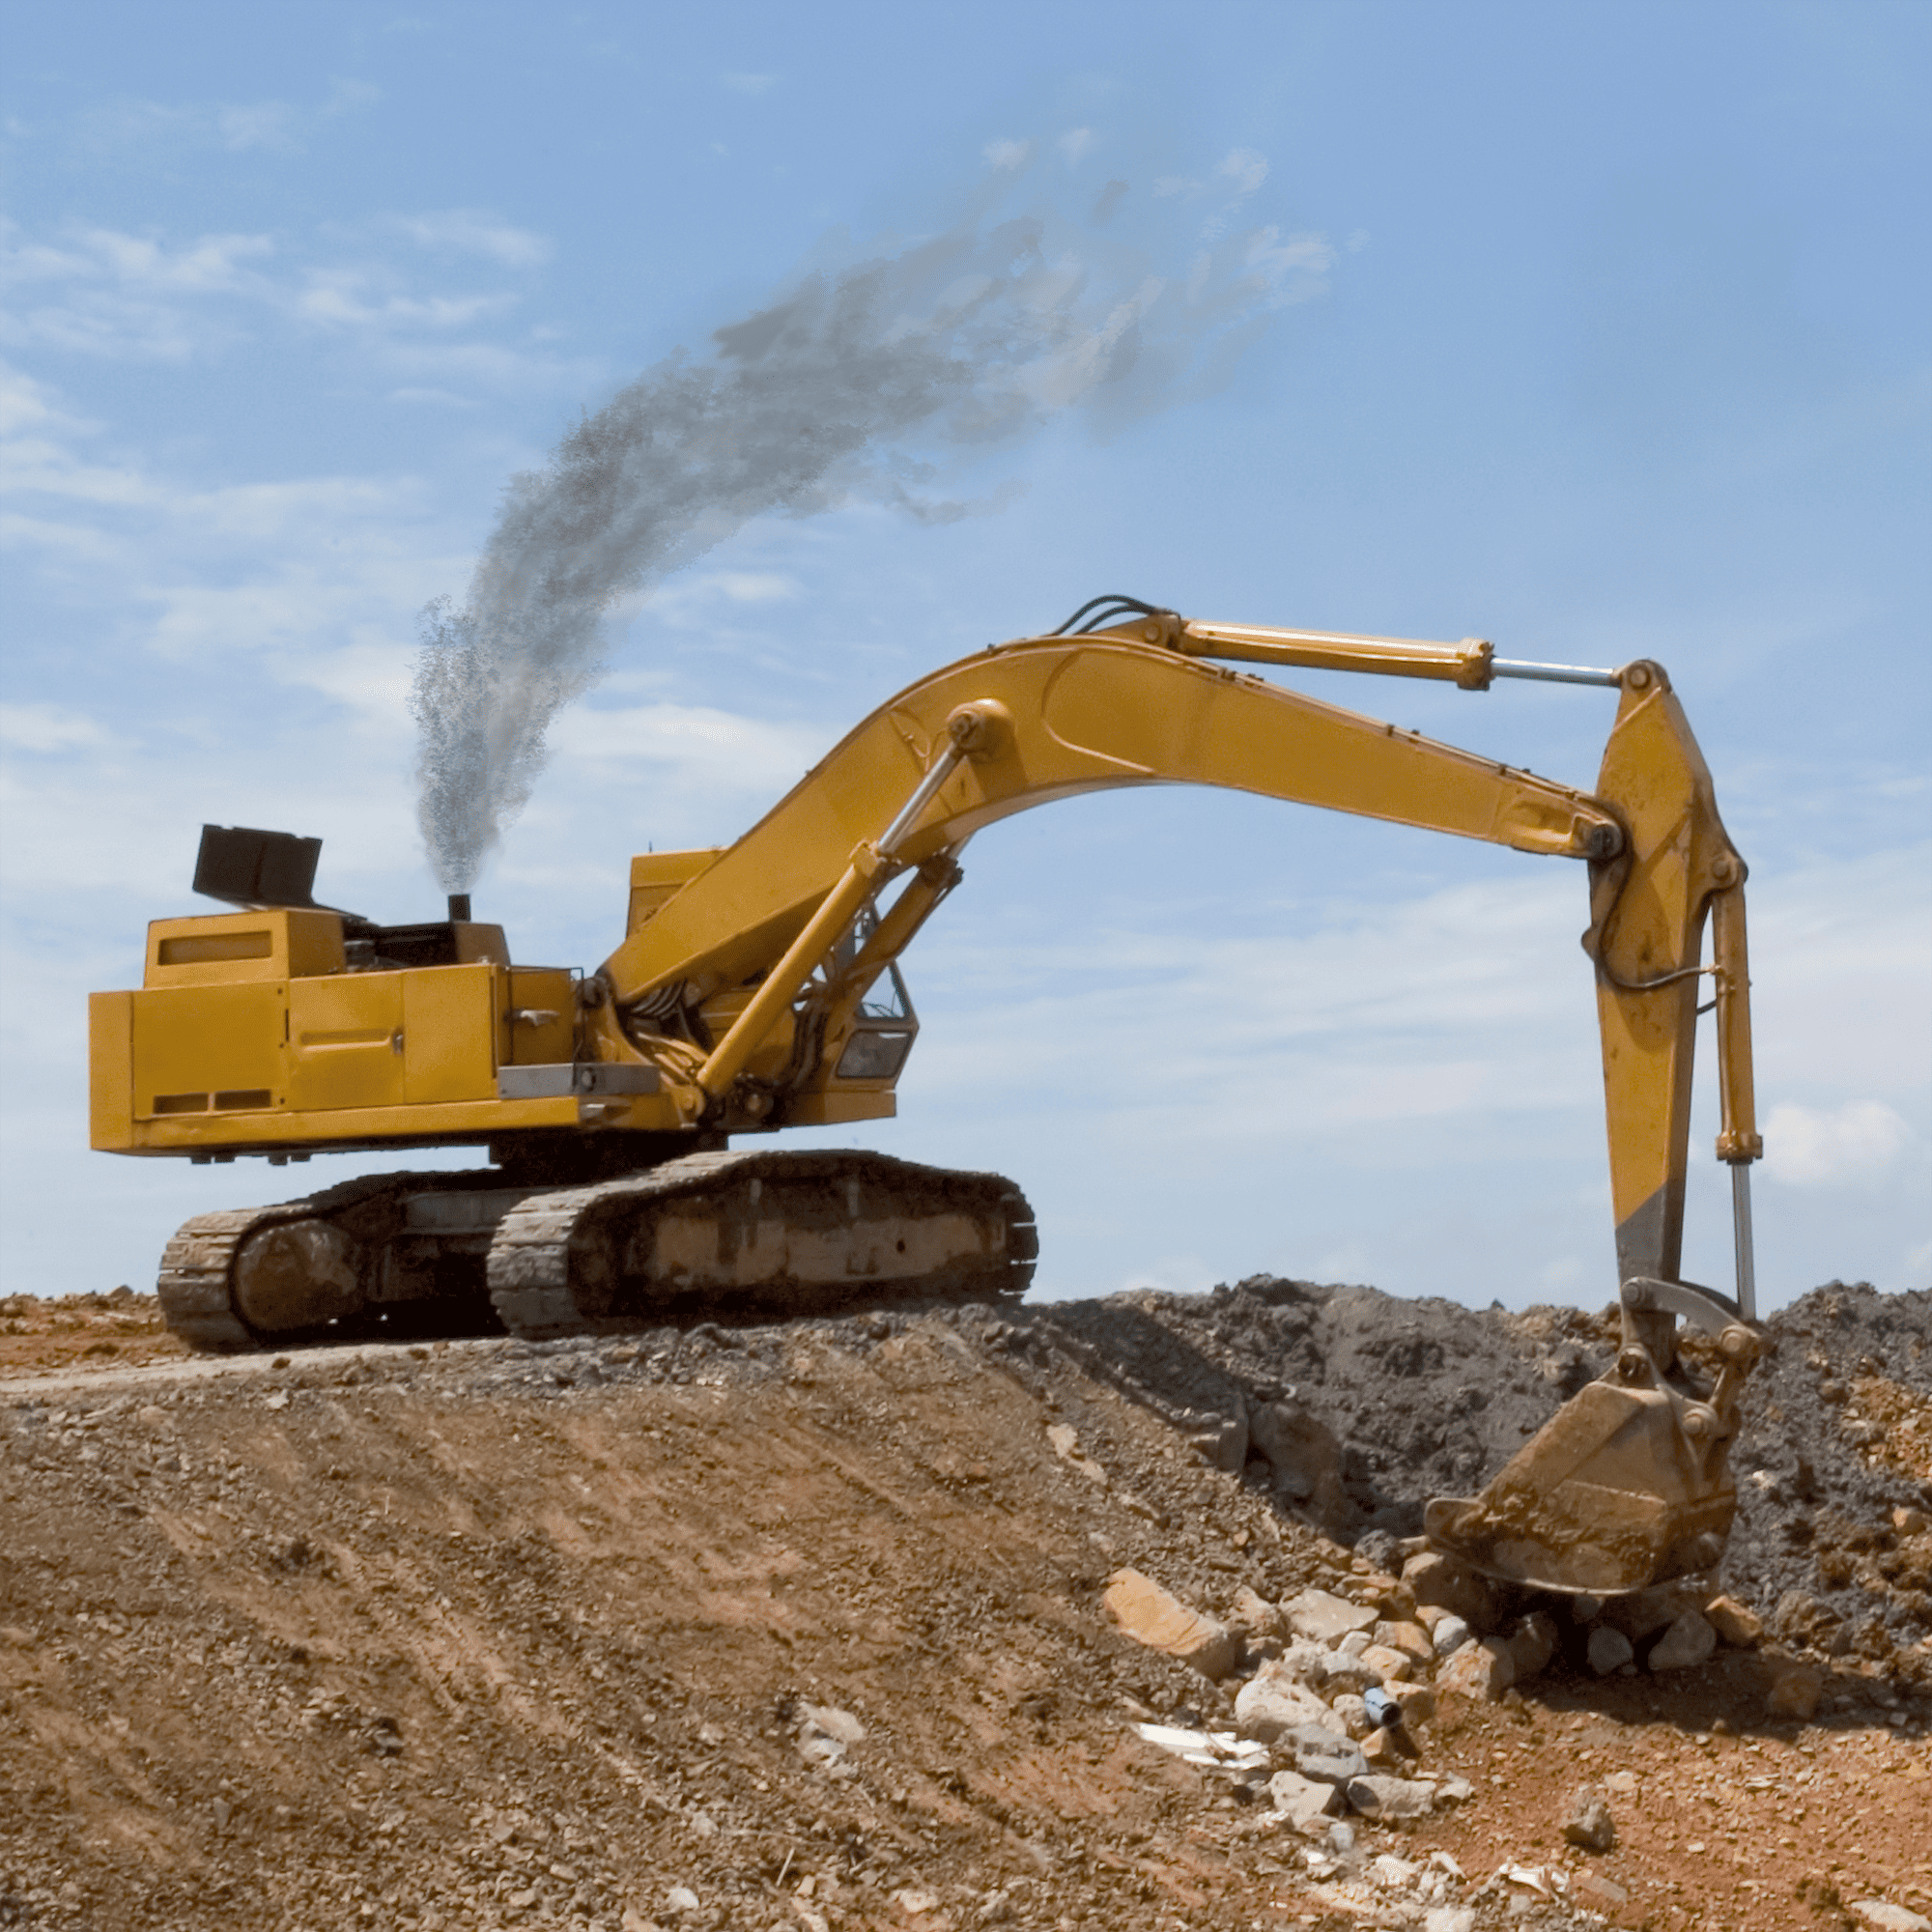 An excavator with a smoke trail coming from the top